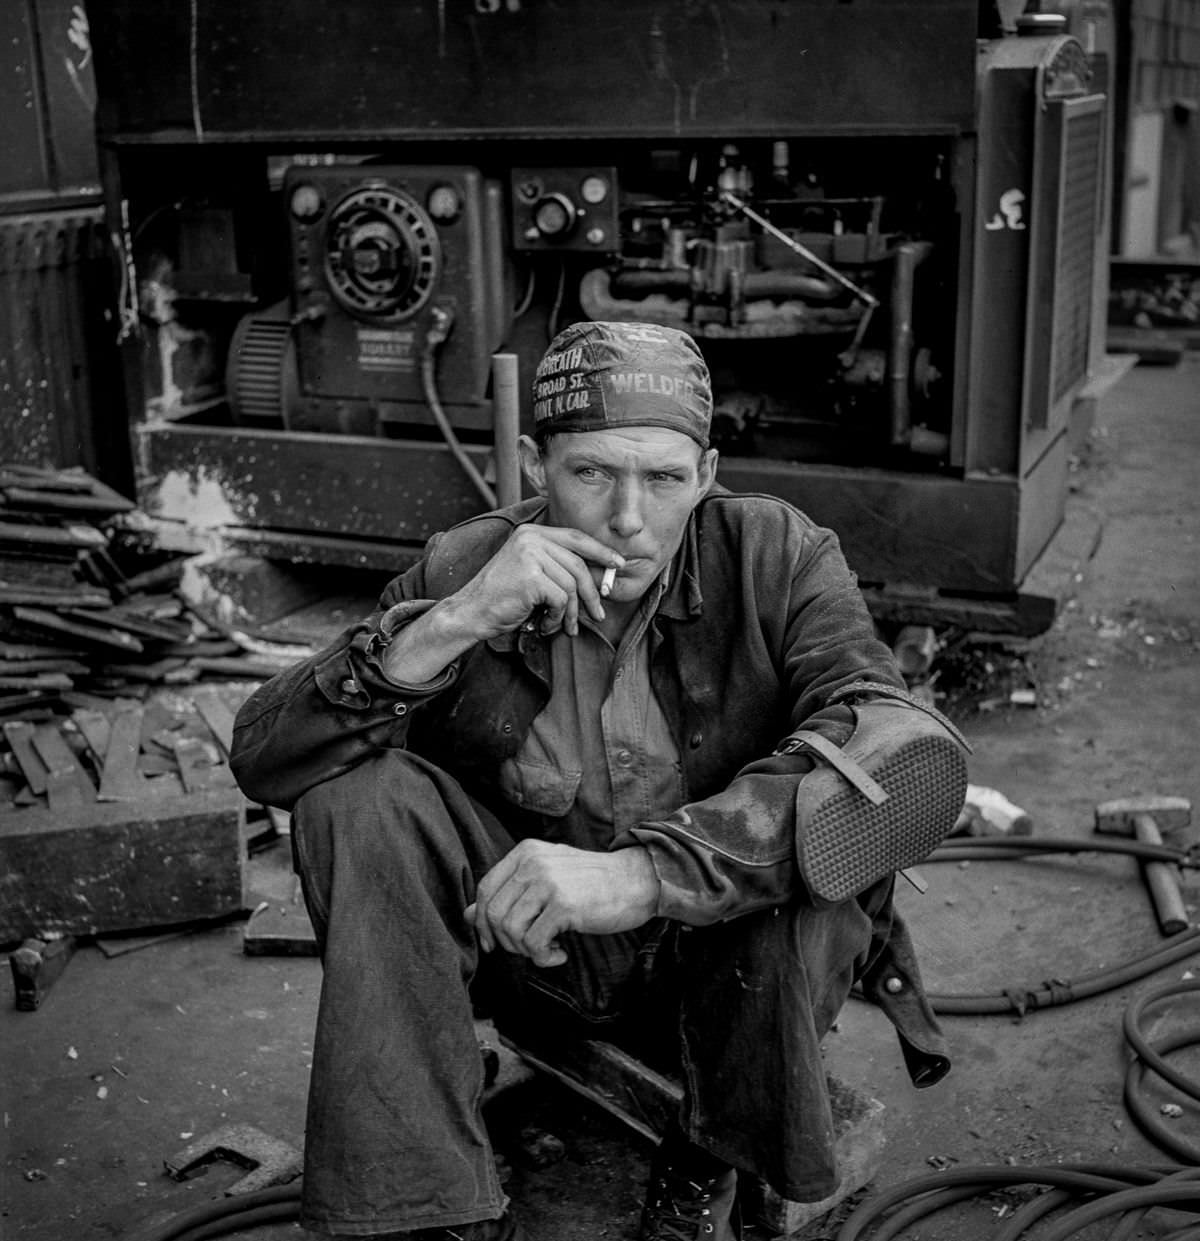 A welder rests during his lunch hour